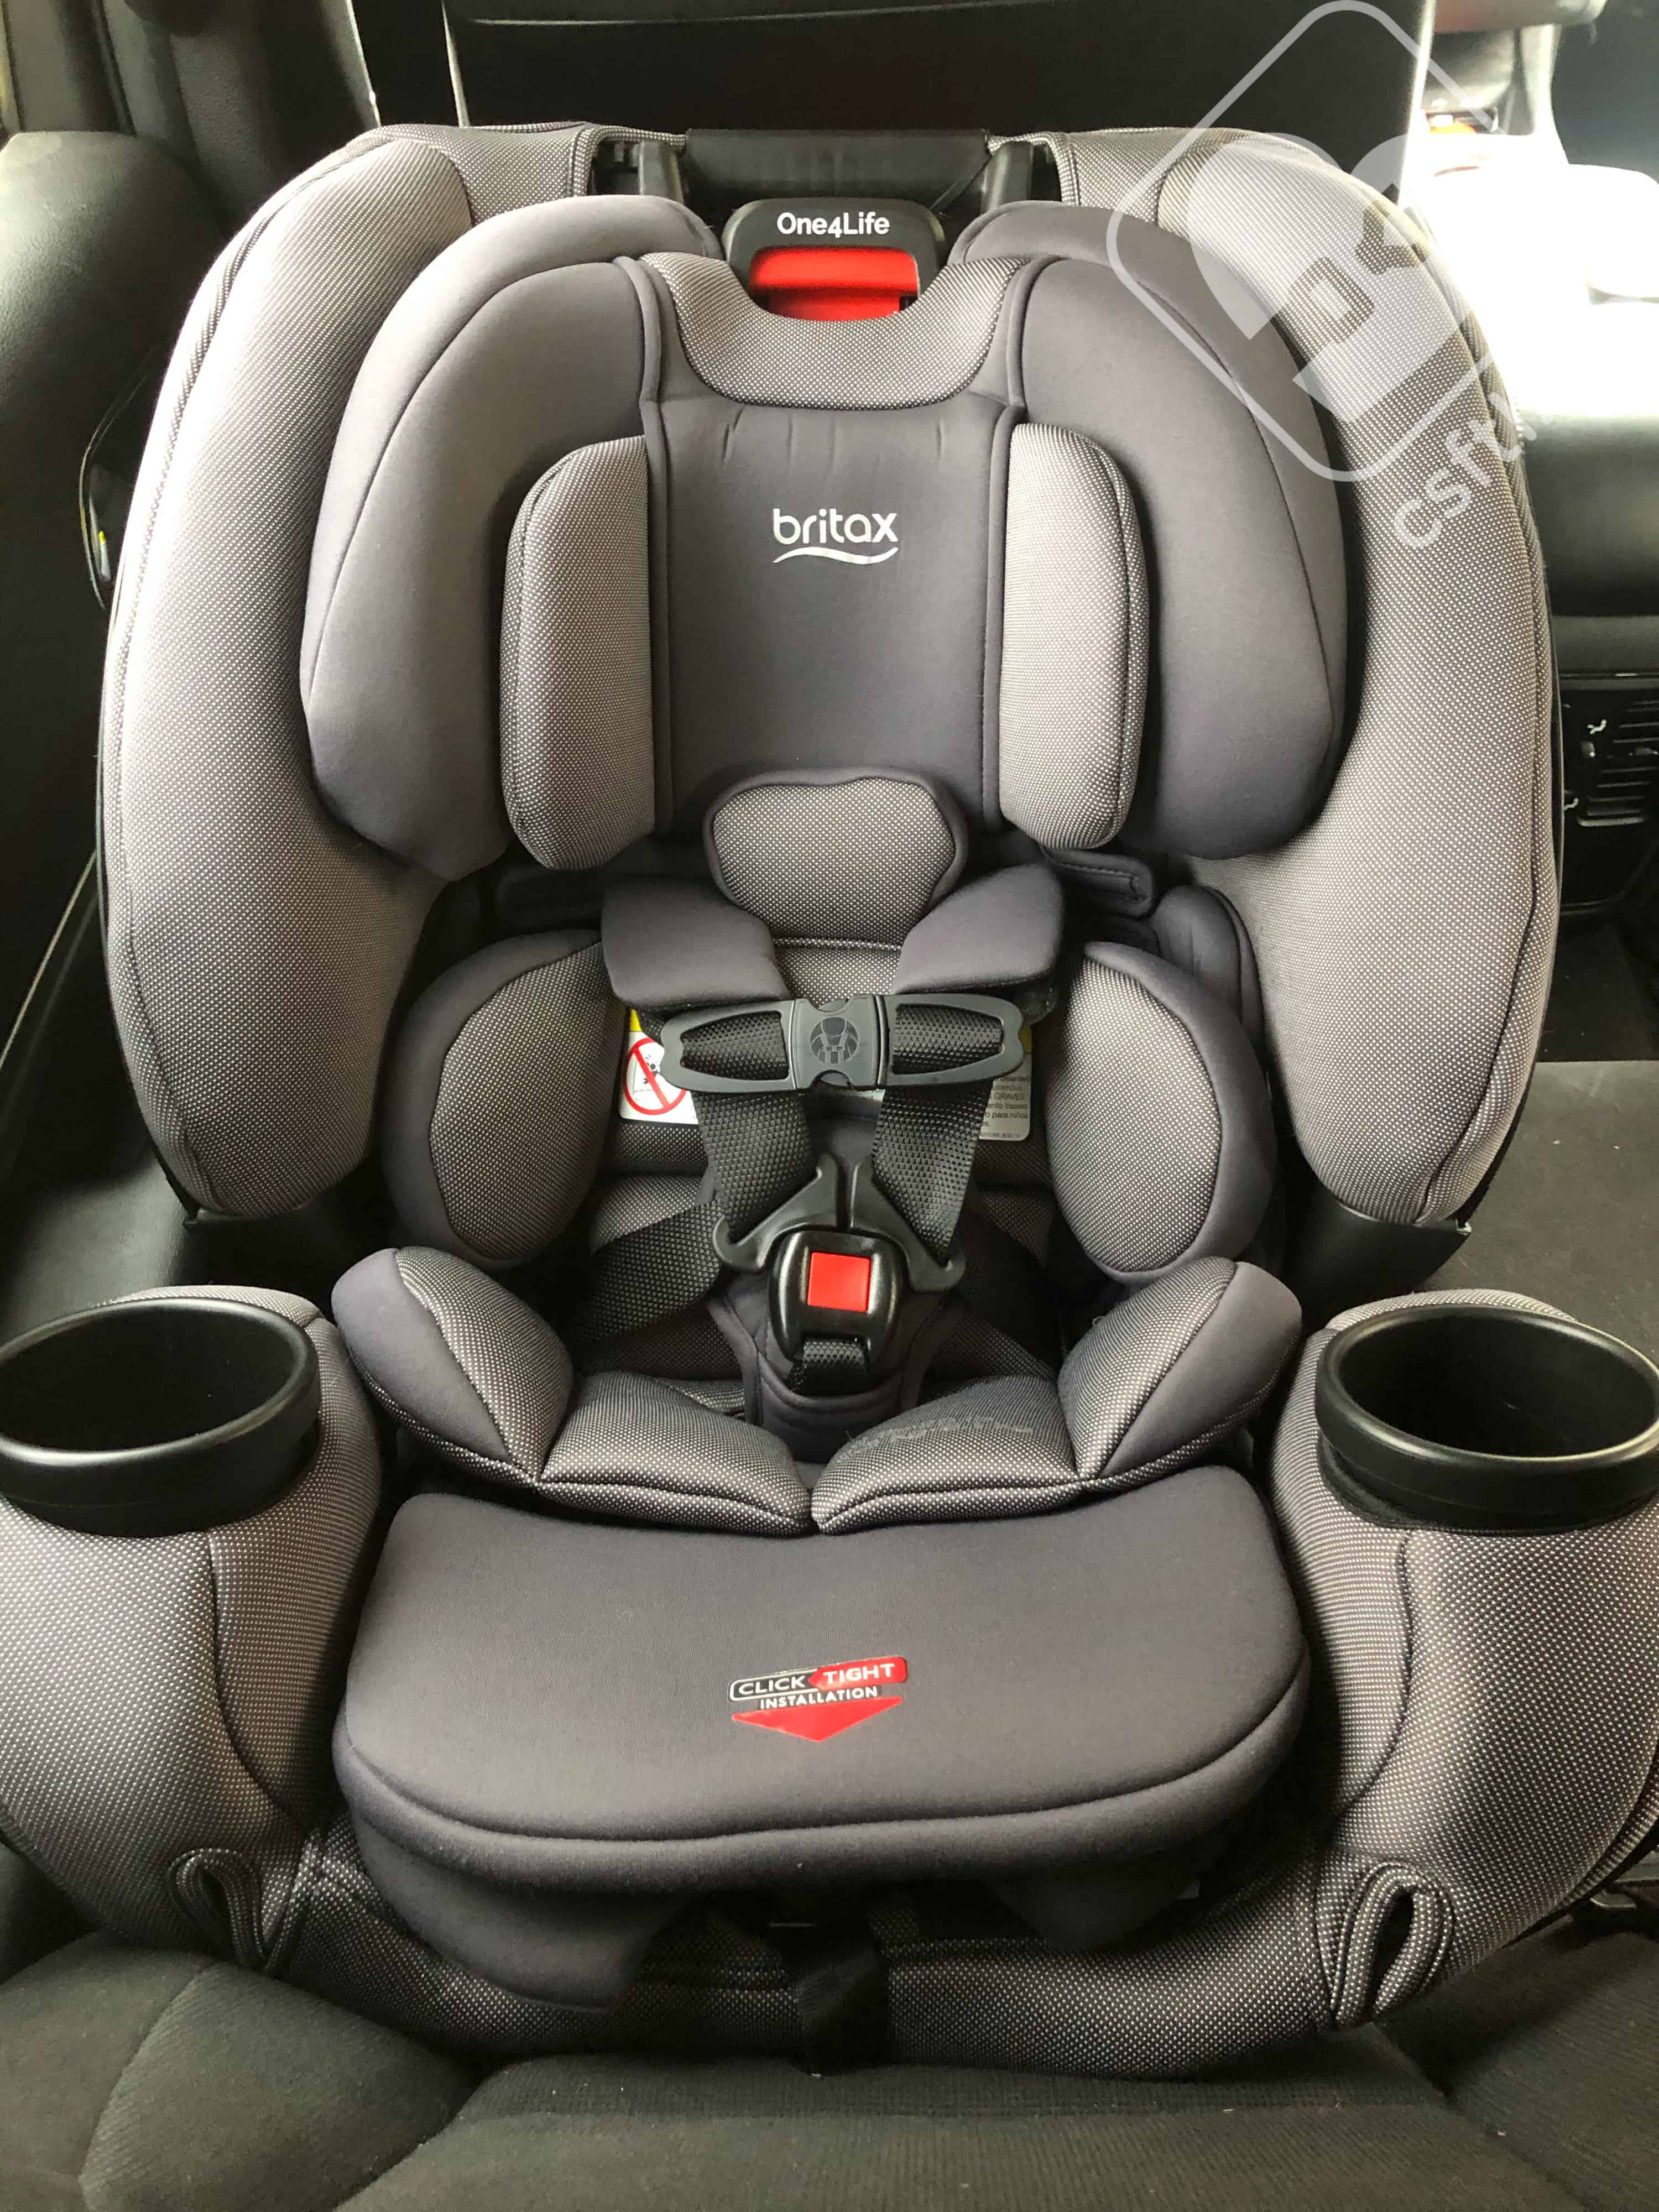 Britax One4life Review United States, Britax Car Seat Loosen Straps